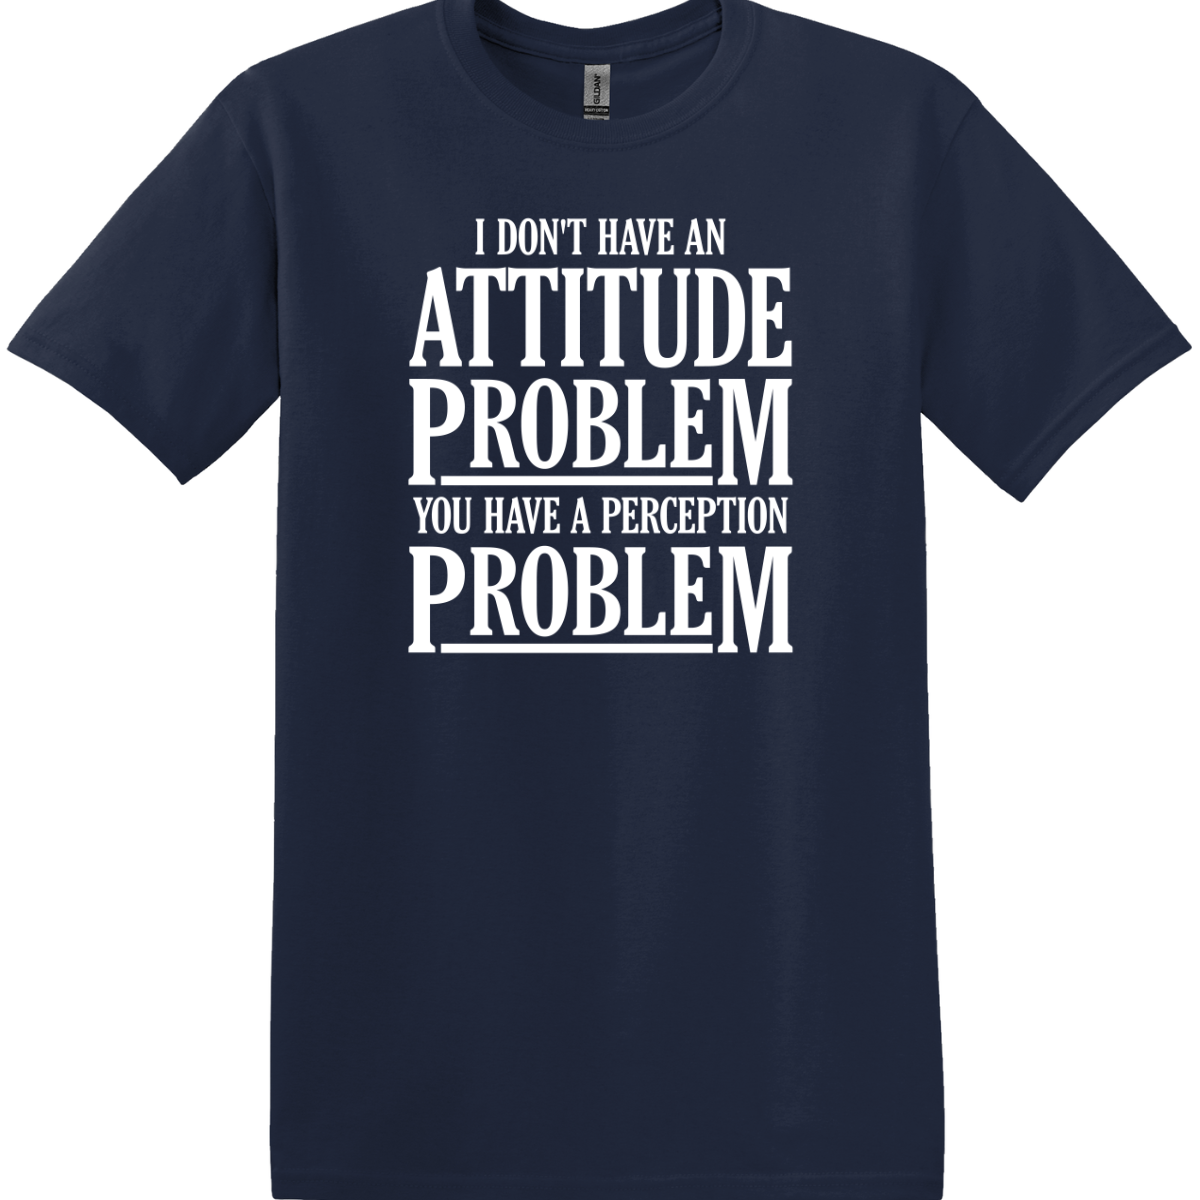 I Don't Have an Attitude Problem Tee